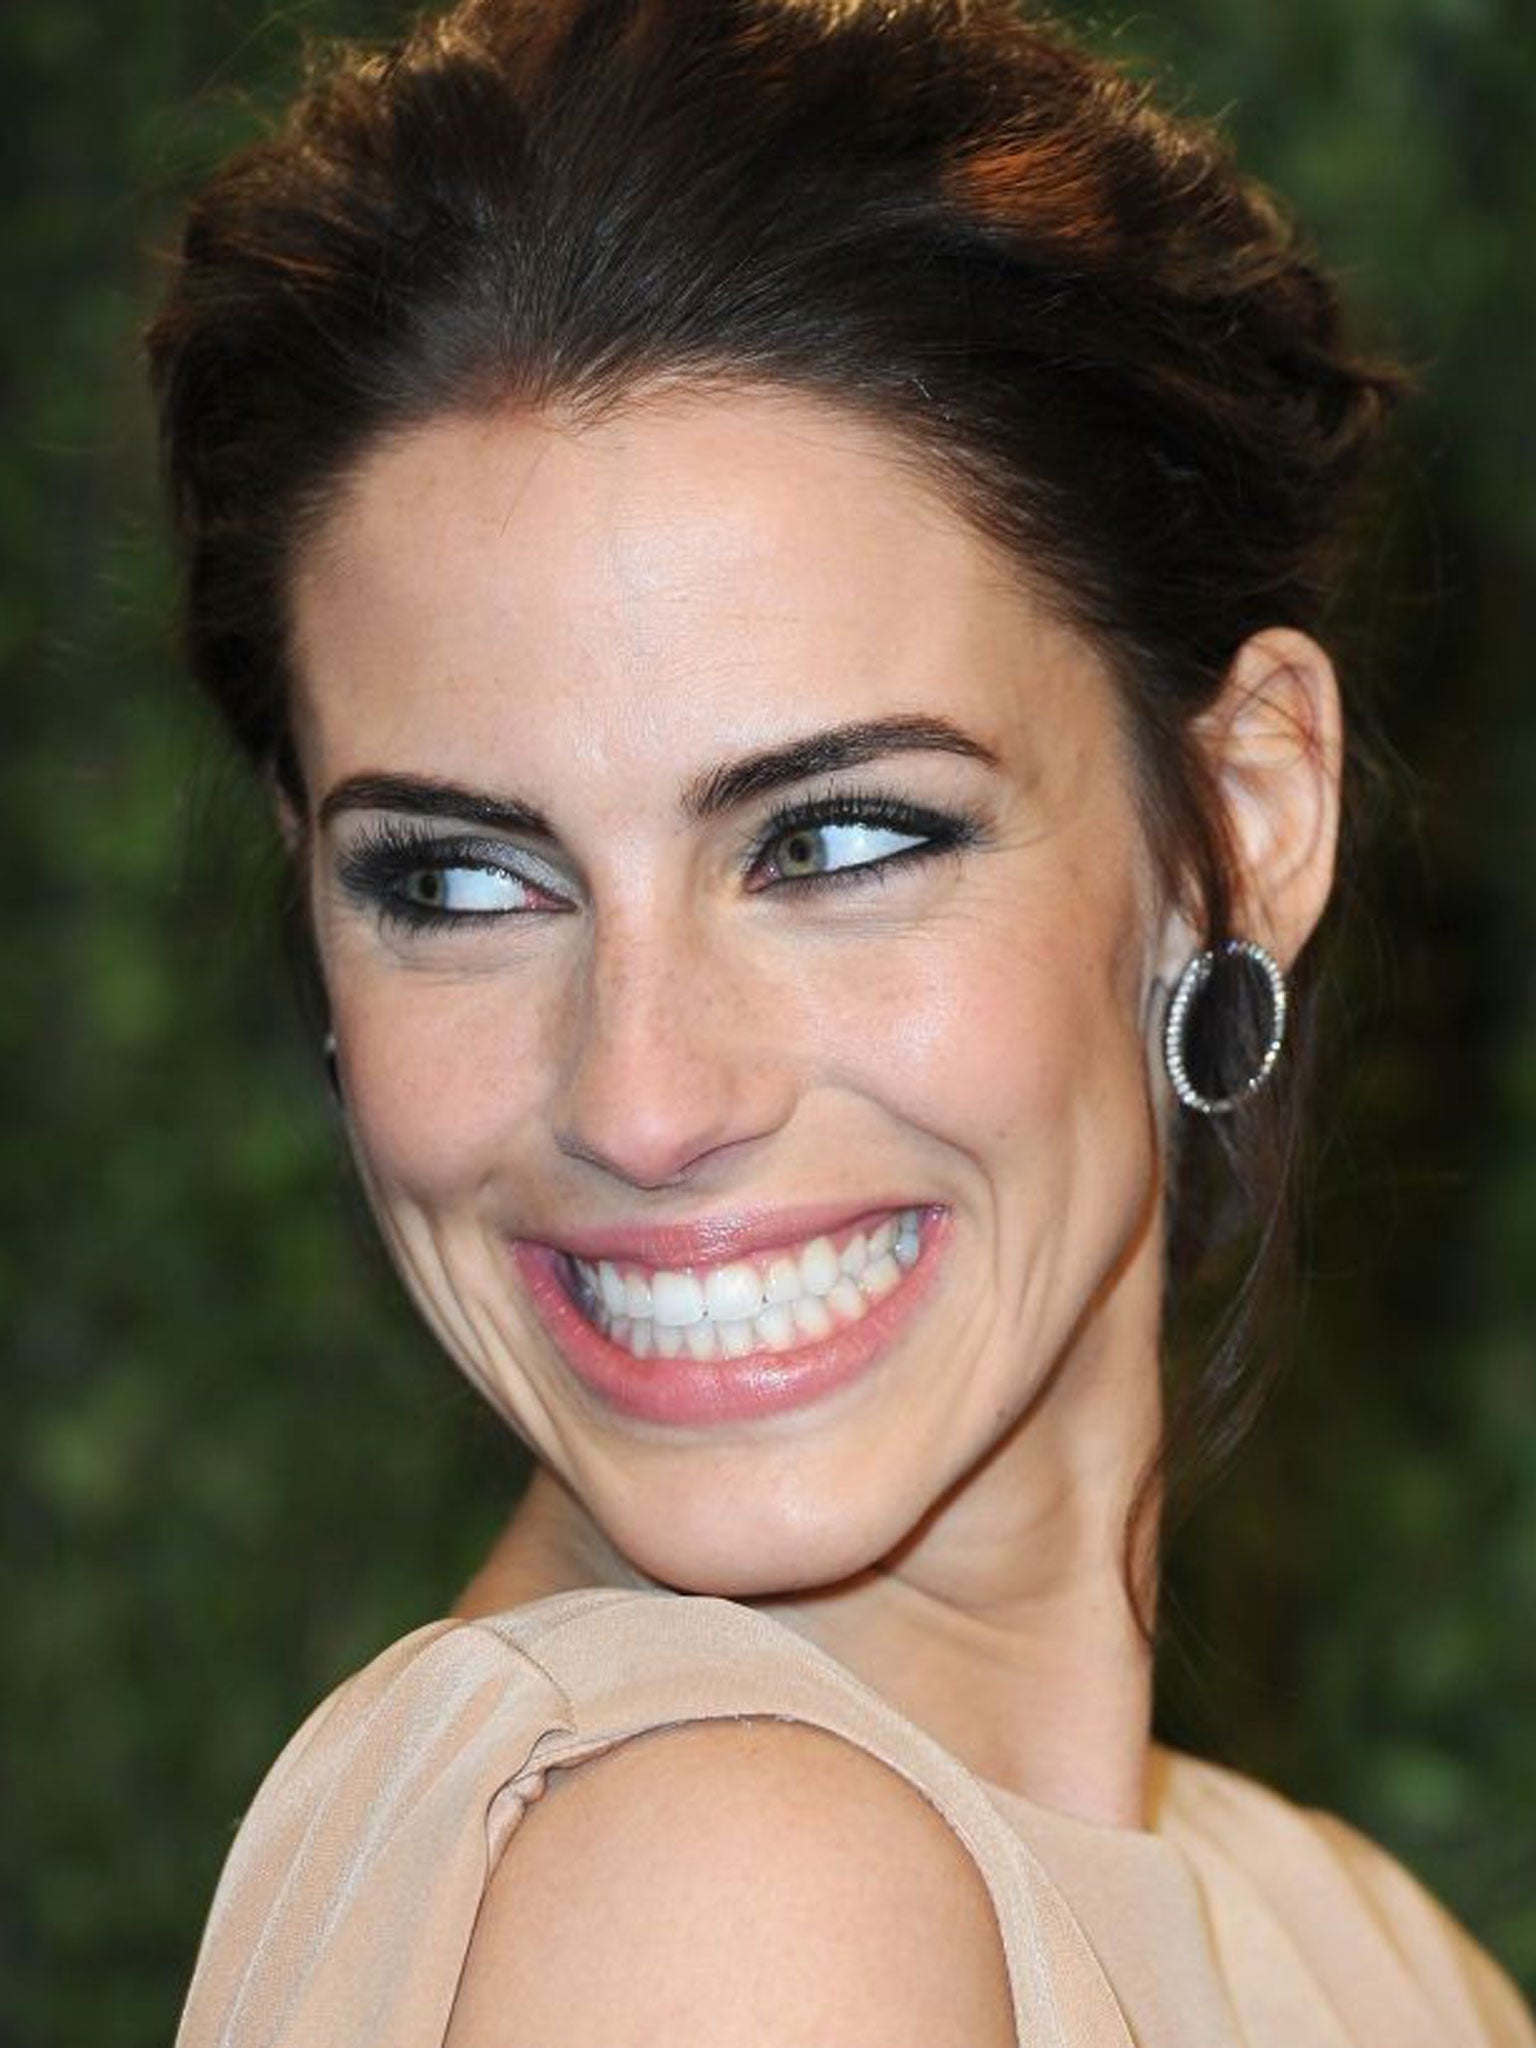 Jessica Lowndes, from 90210